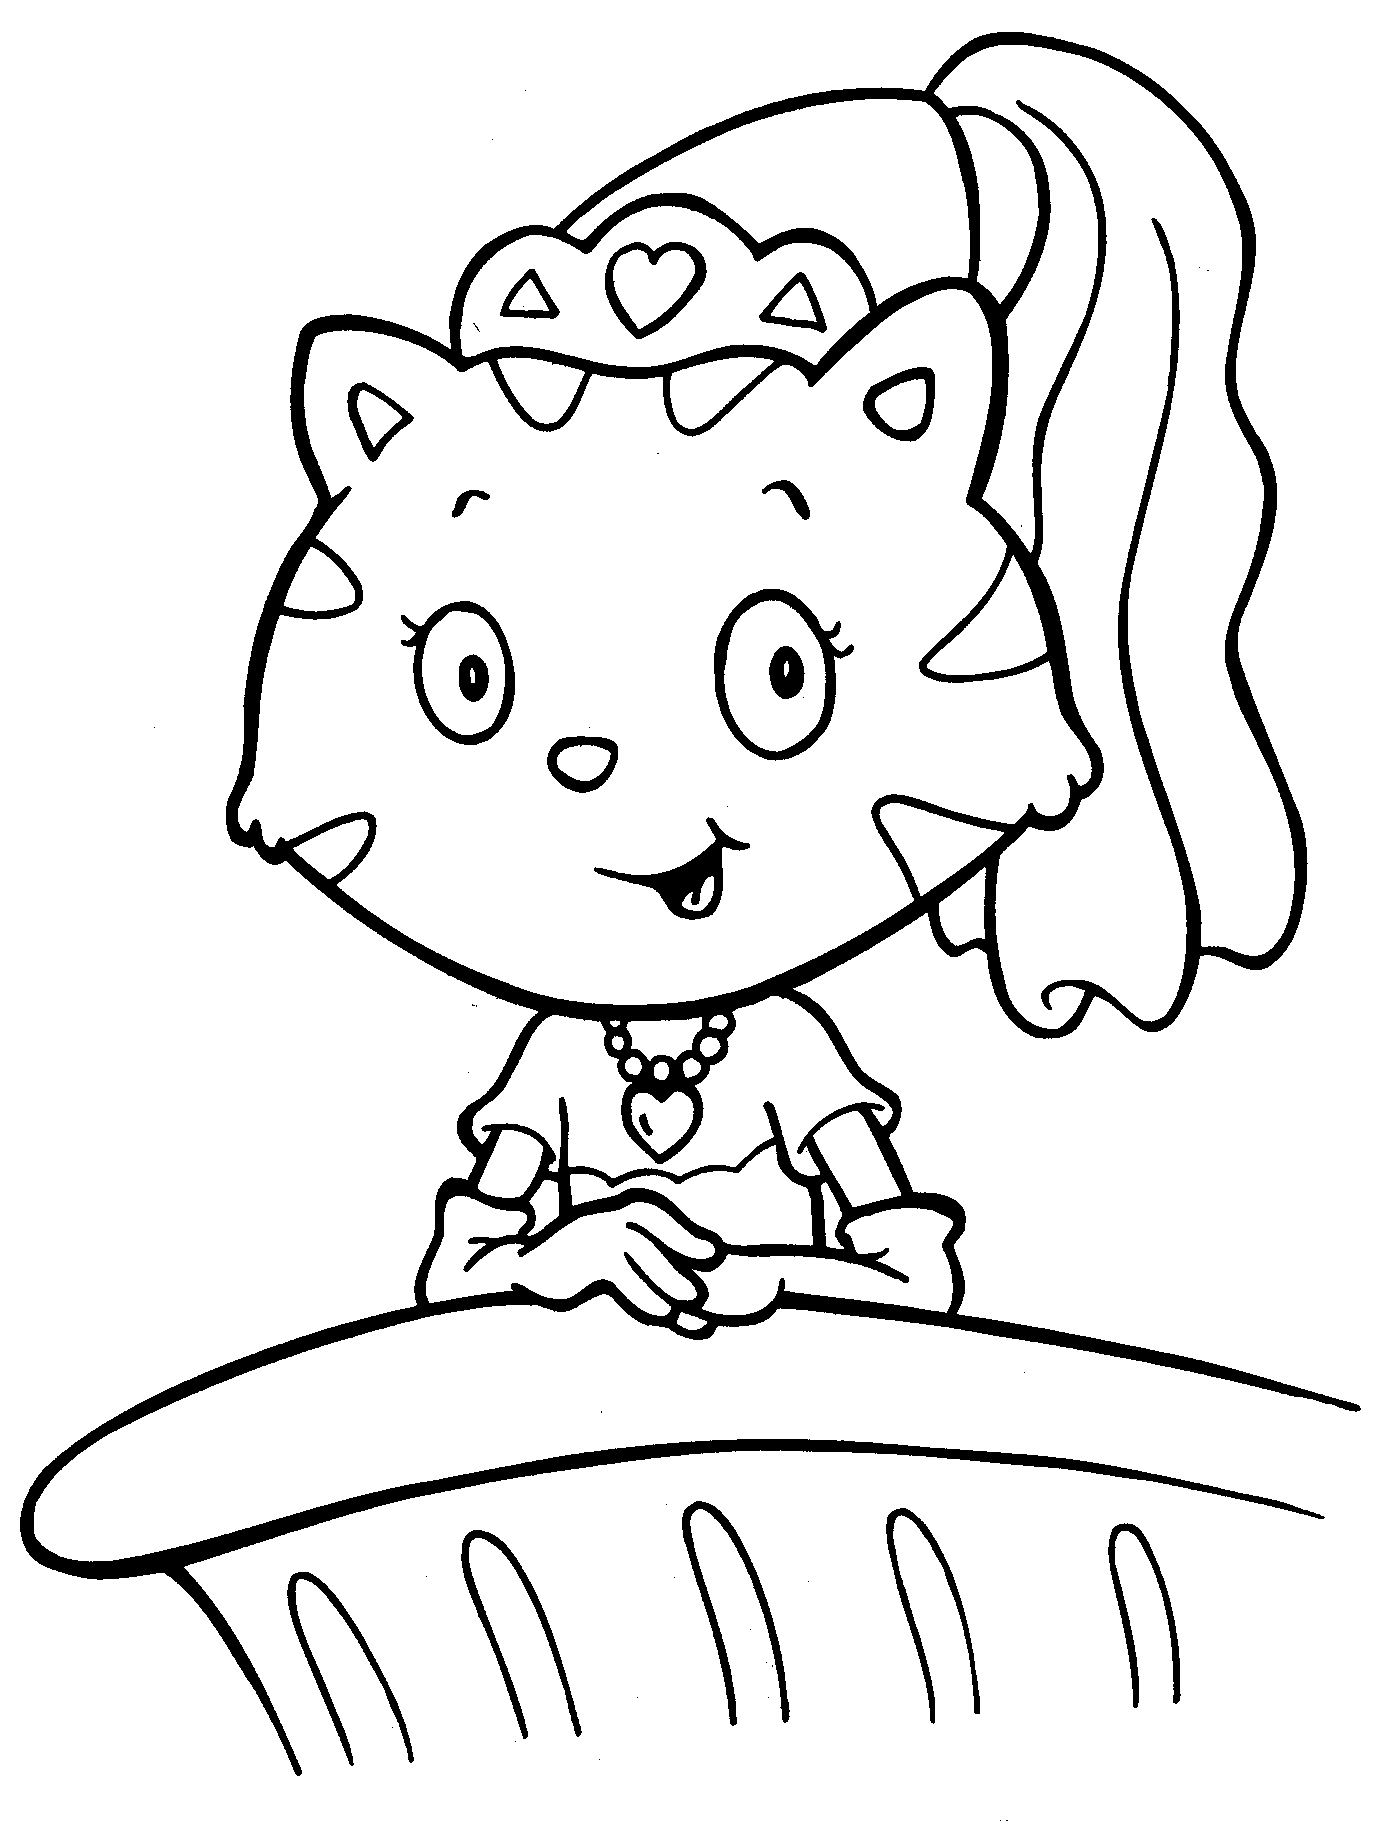 Cat Coloring Pages | Cats Coloring pages |Kitten Coloring pages | Cool